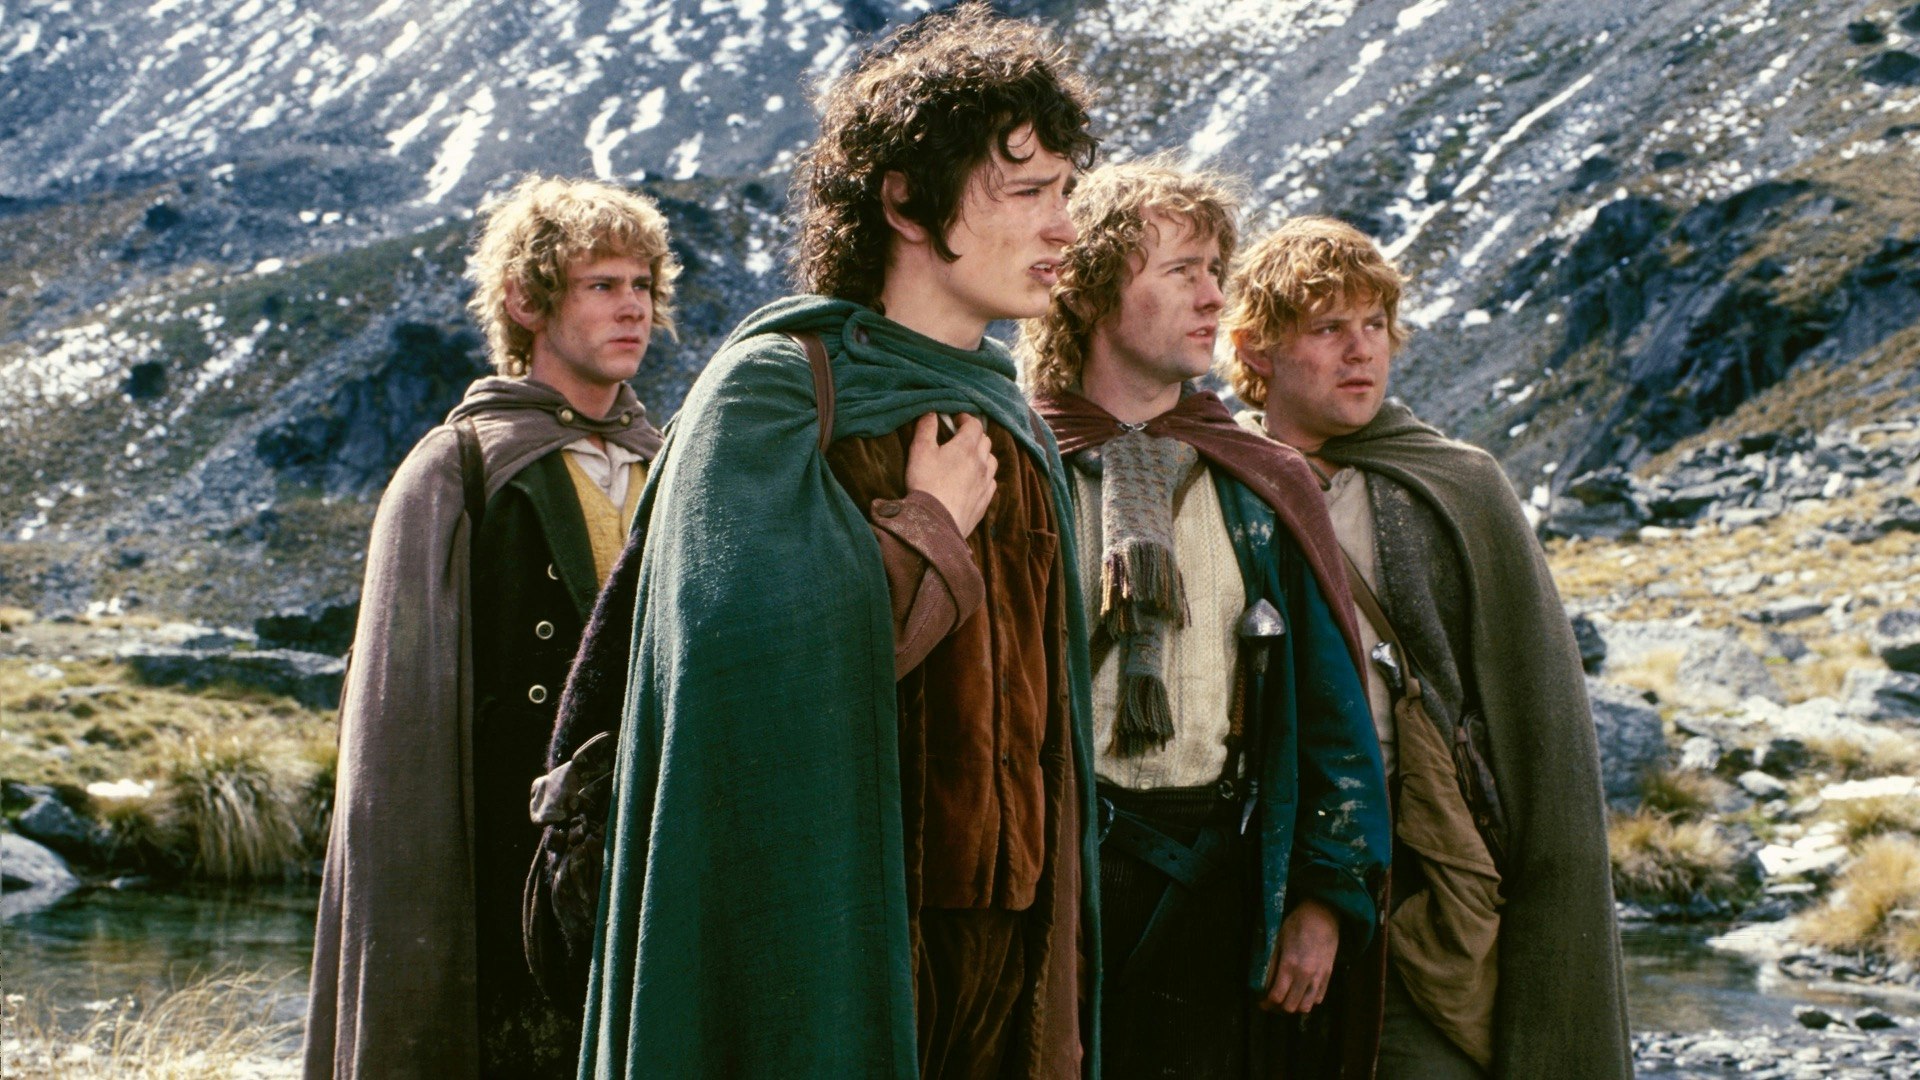 The Lord of the Rings - The Fellowship of the Ring (The Lord of